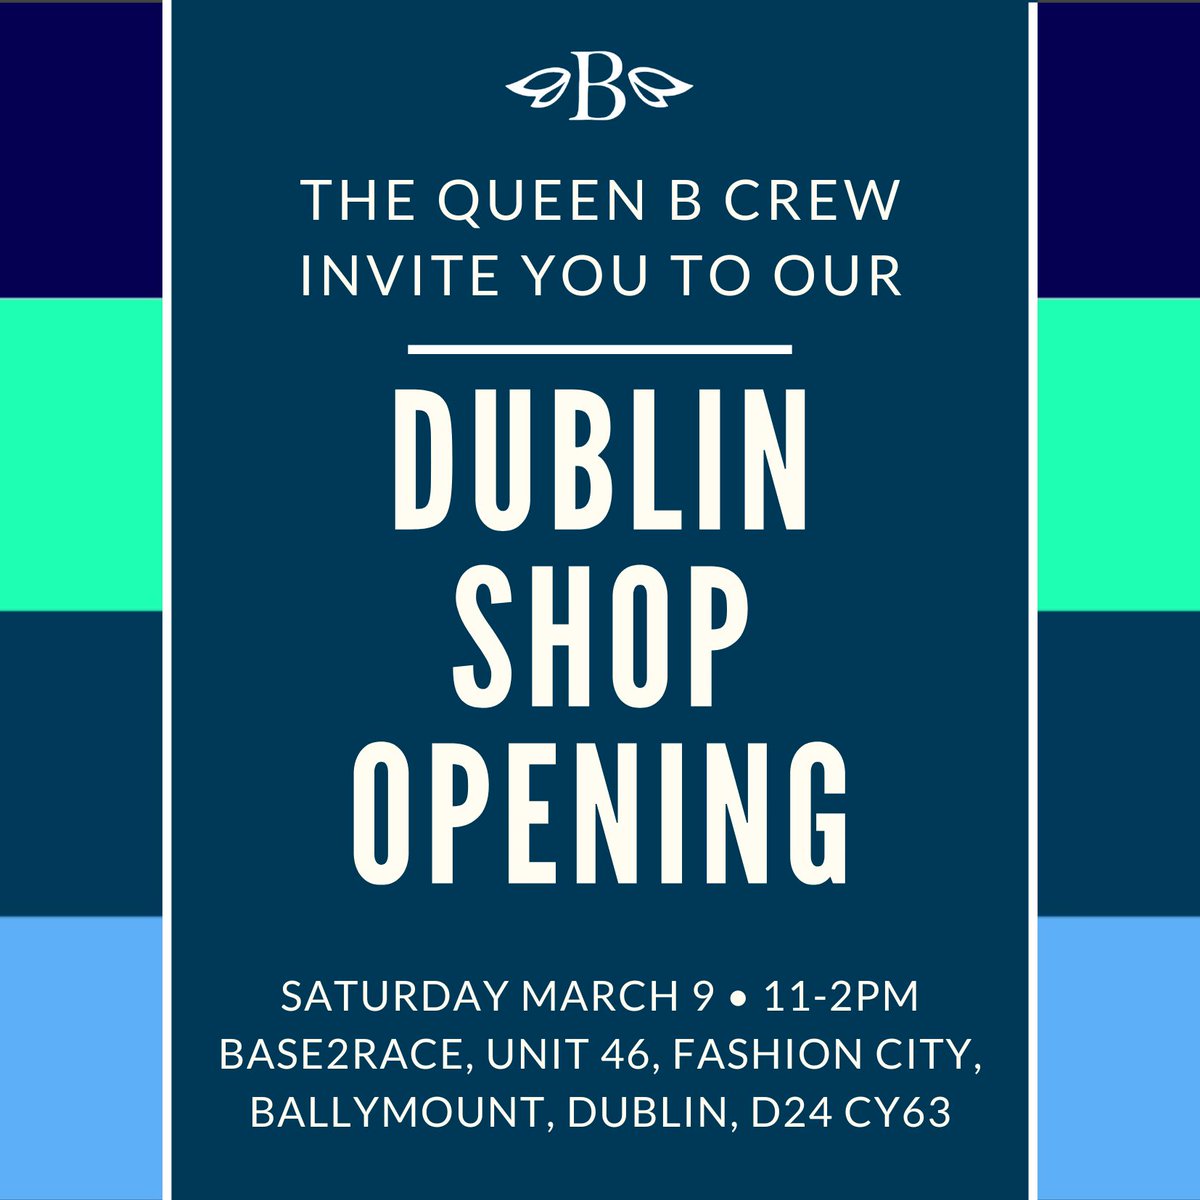 The wonderful people at @queenbathletics - long-time supporters of @IreWomenHockey - are opening a new shop in Dublin! They would love to see you on Saturday!